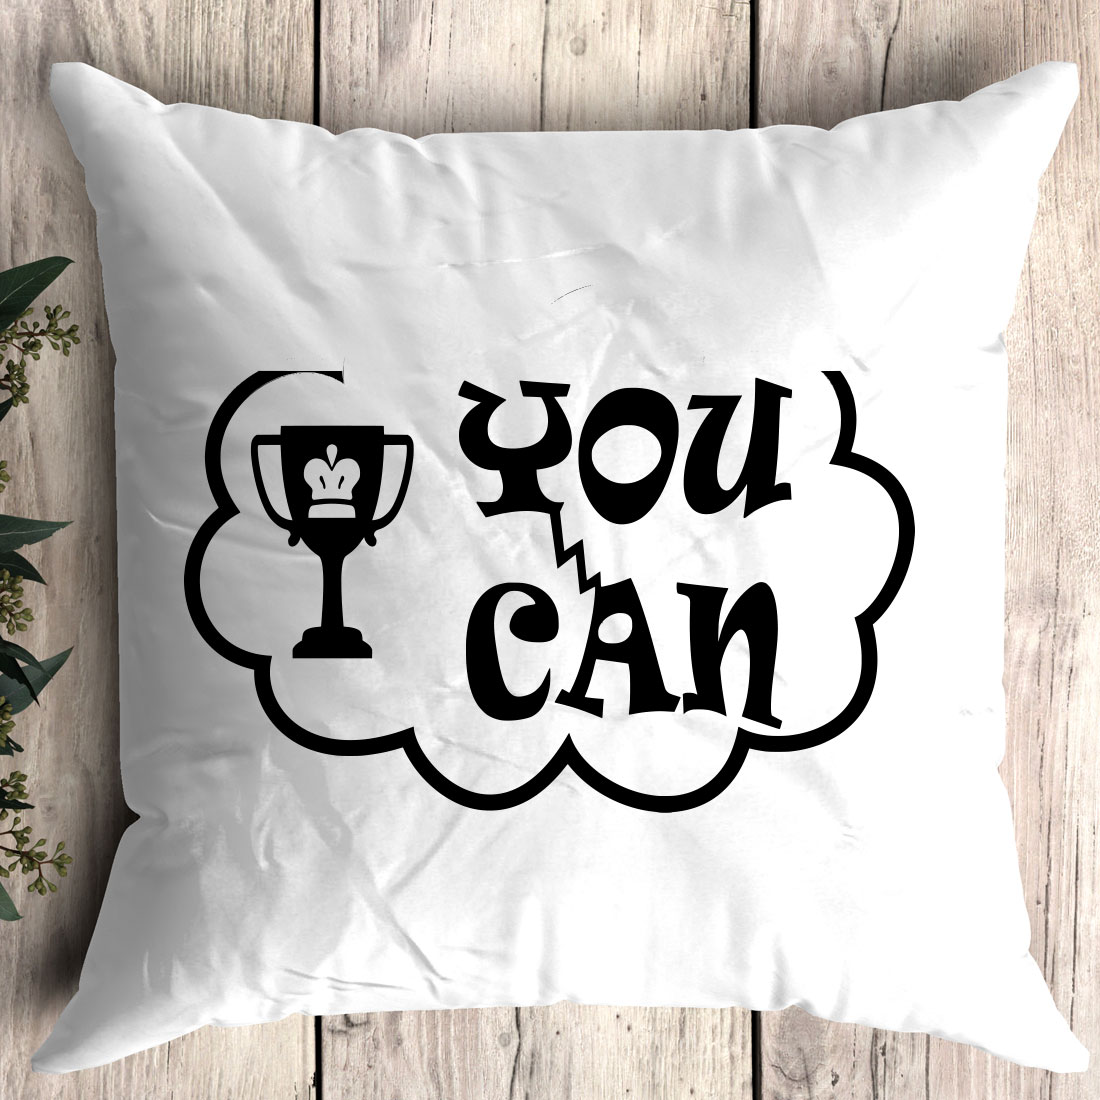 Pillow that says you can with a glass of wine.